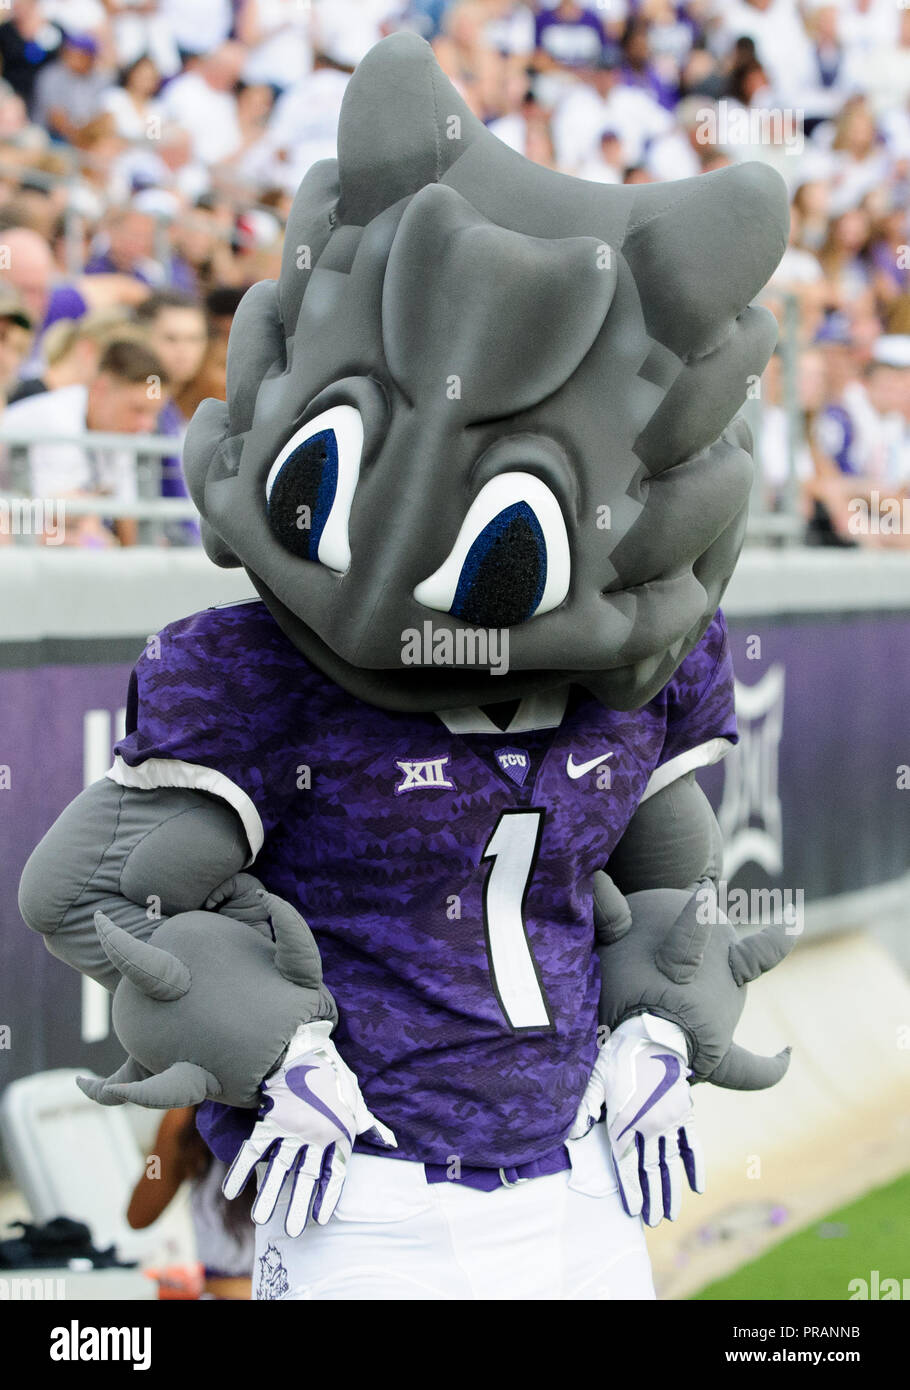 Waco, Texas, USA. 29th Sep, 2018. TCU Horned Frogs mascot during the 1st half of the NCAA Football game between the Iowa State Cyclones and the TCU Horned Frogs at Amon G. Carter in Waco, Texas. Matthew Lynch/CSM/Alamy Live News Stock Photo